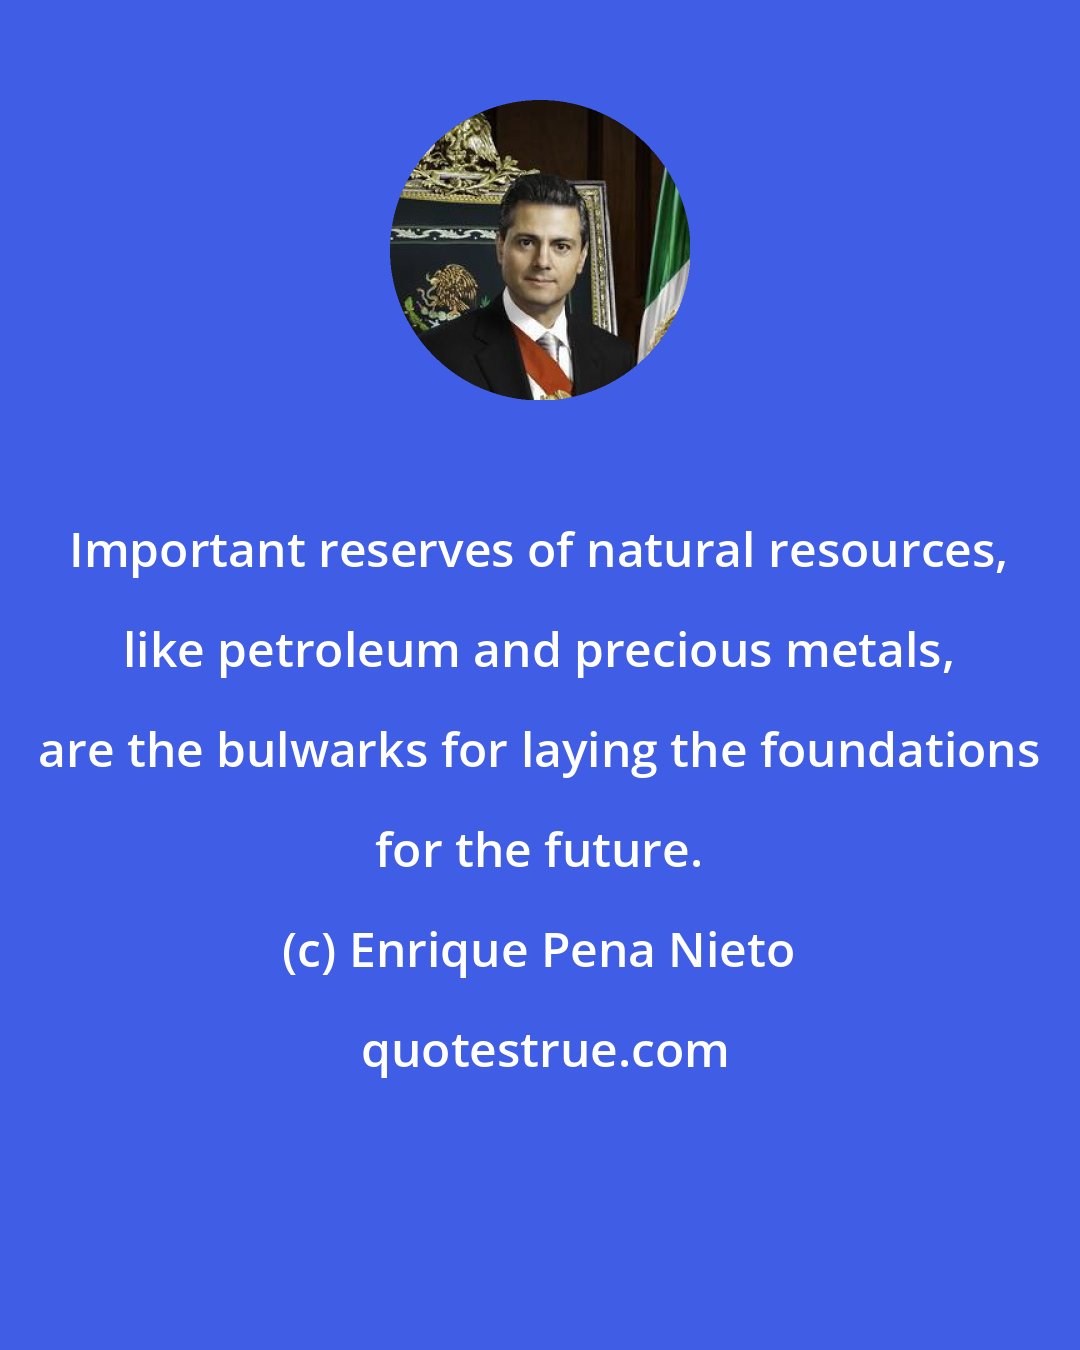 Enrique Pena Nieto: Important reserves of natural resources, like petroleum and precious metals, are the bulwarks for laying the foundations for the future.